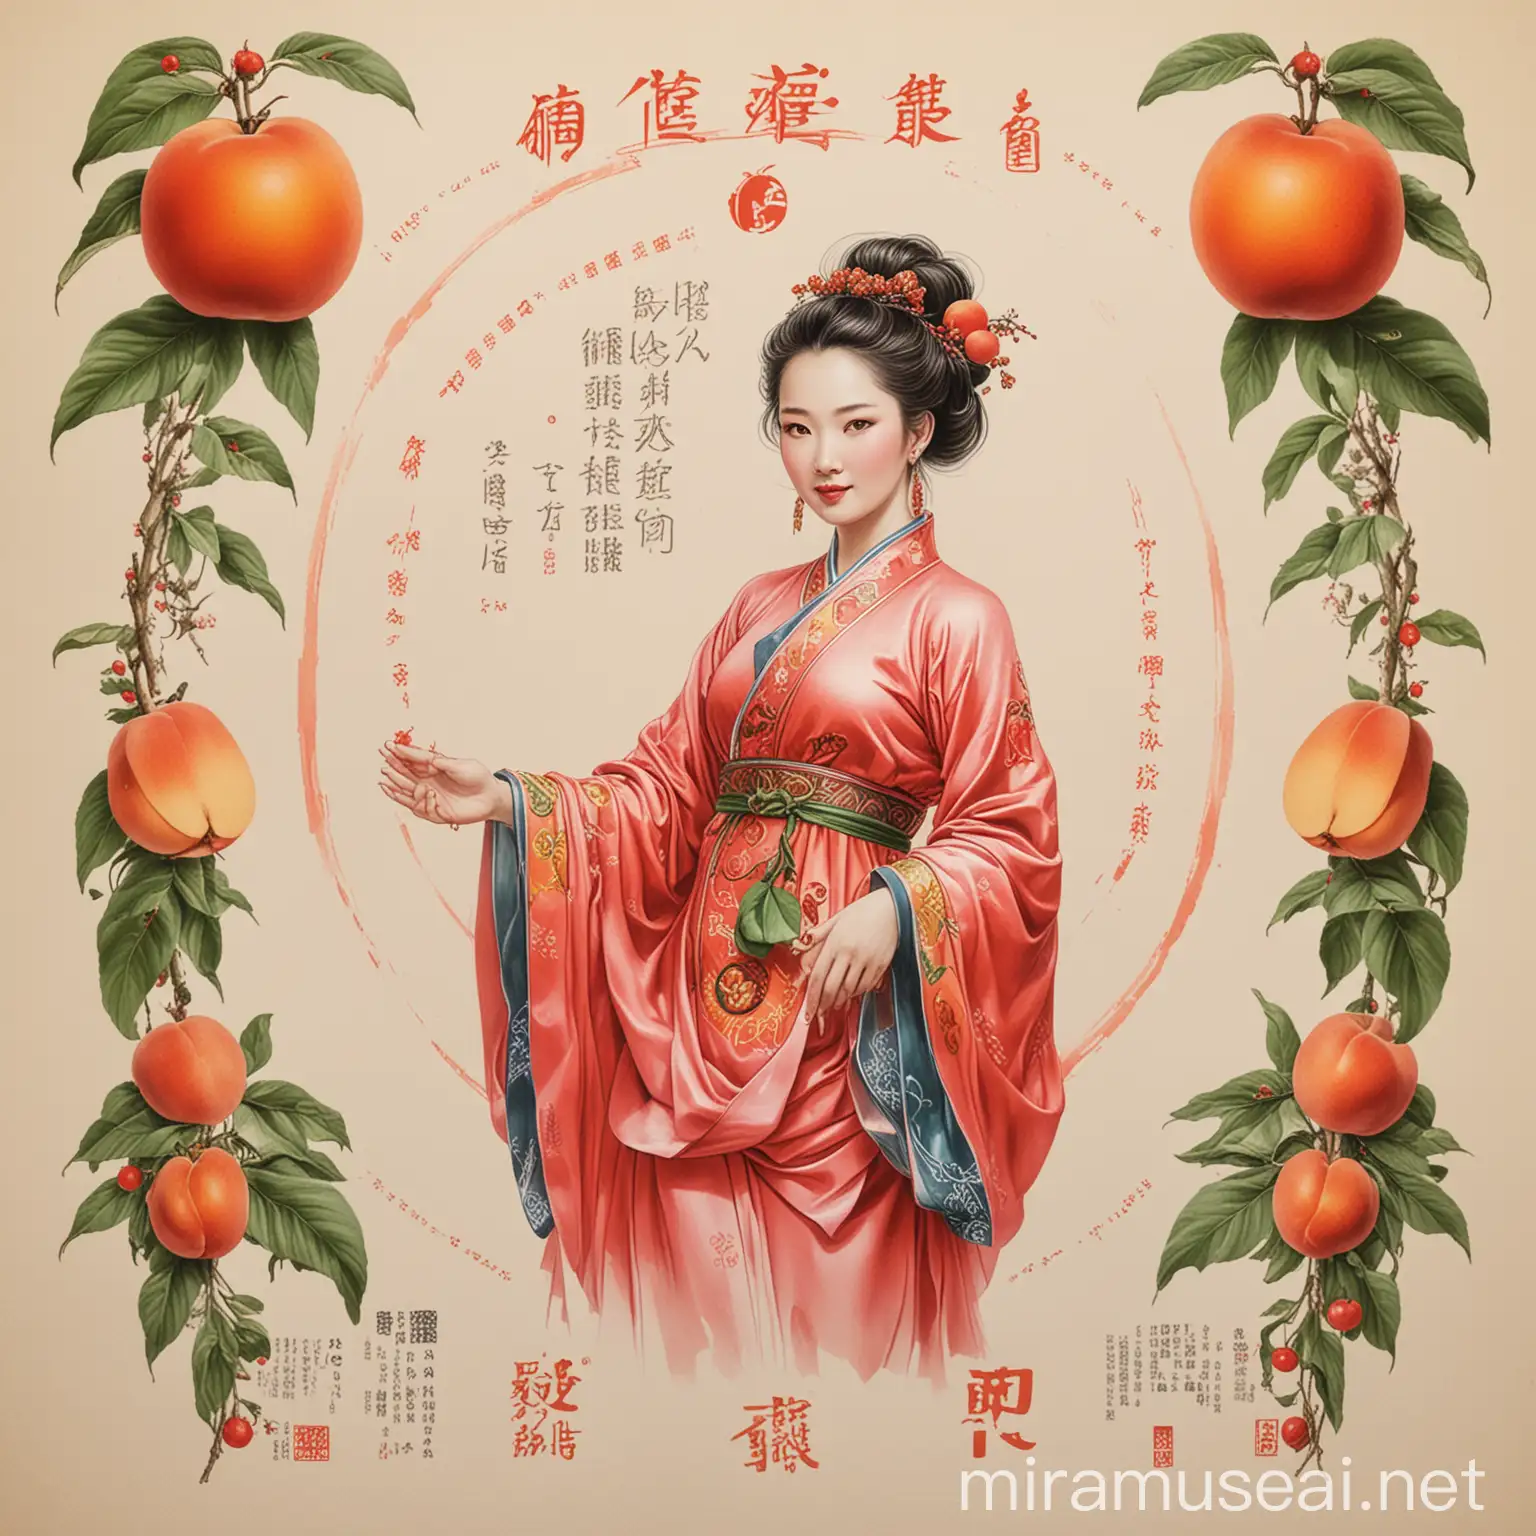 Mao Gepings EastWest Beauty Poster Featuring Goddess of Peaches and Brand Products